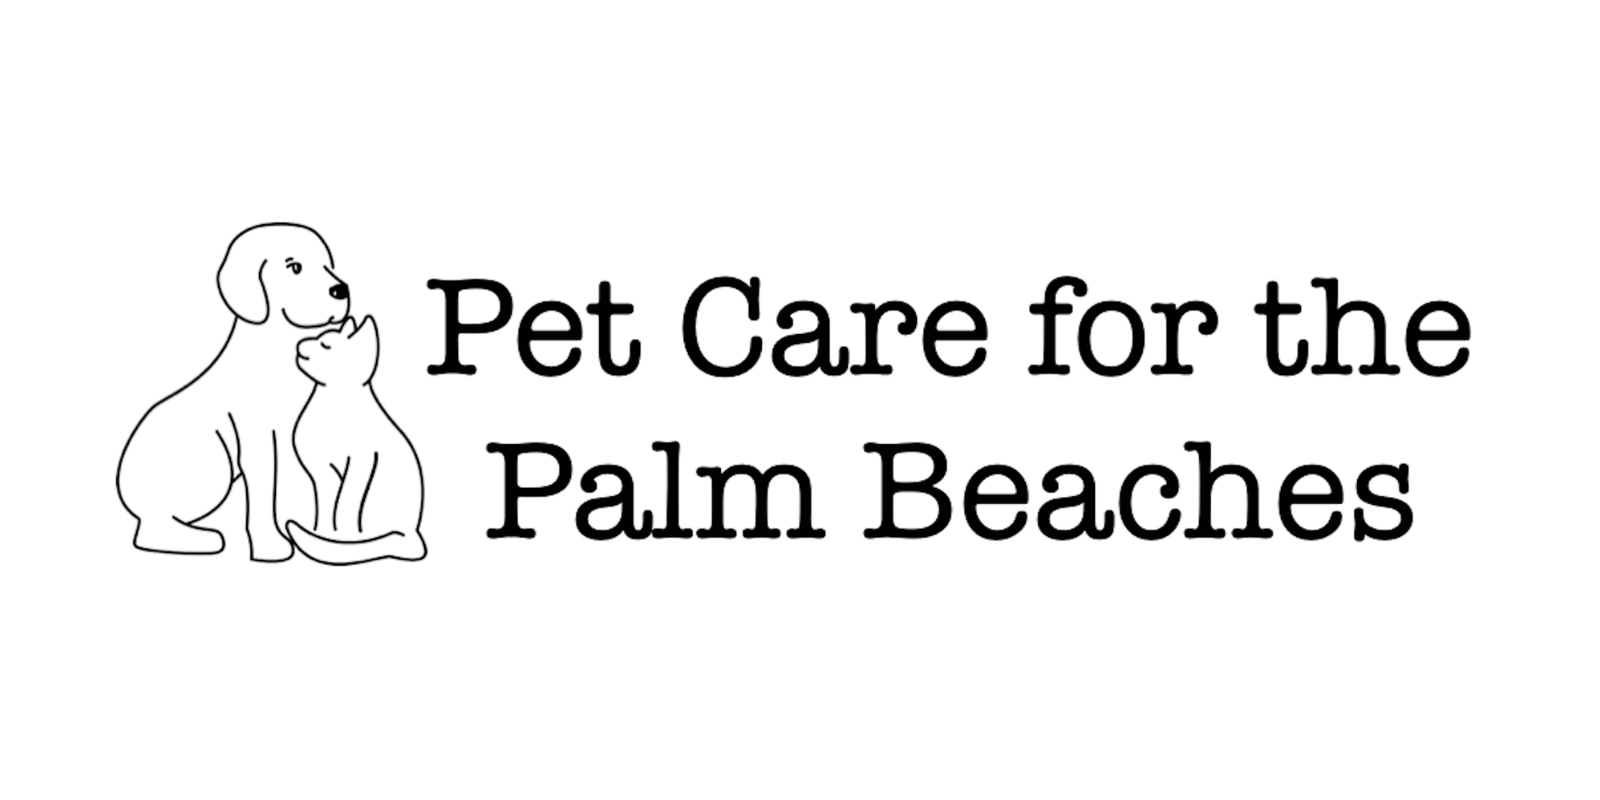 Pet-Care-For-The-Palb-Beaches-logo-Summary.png